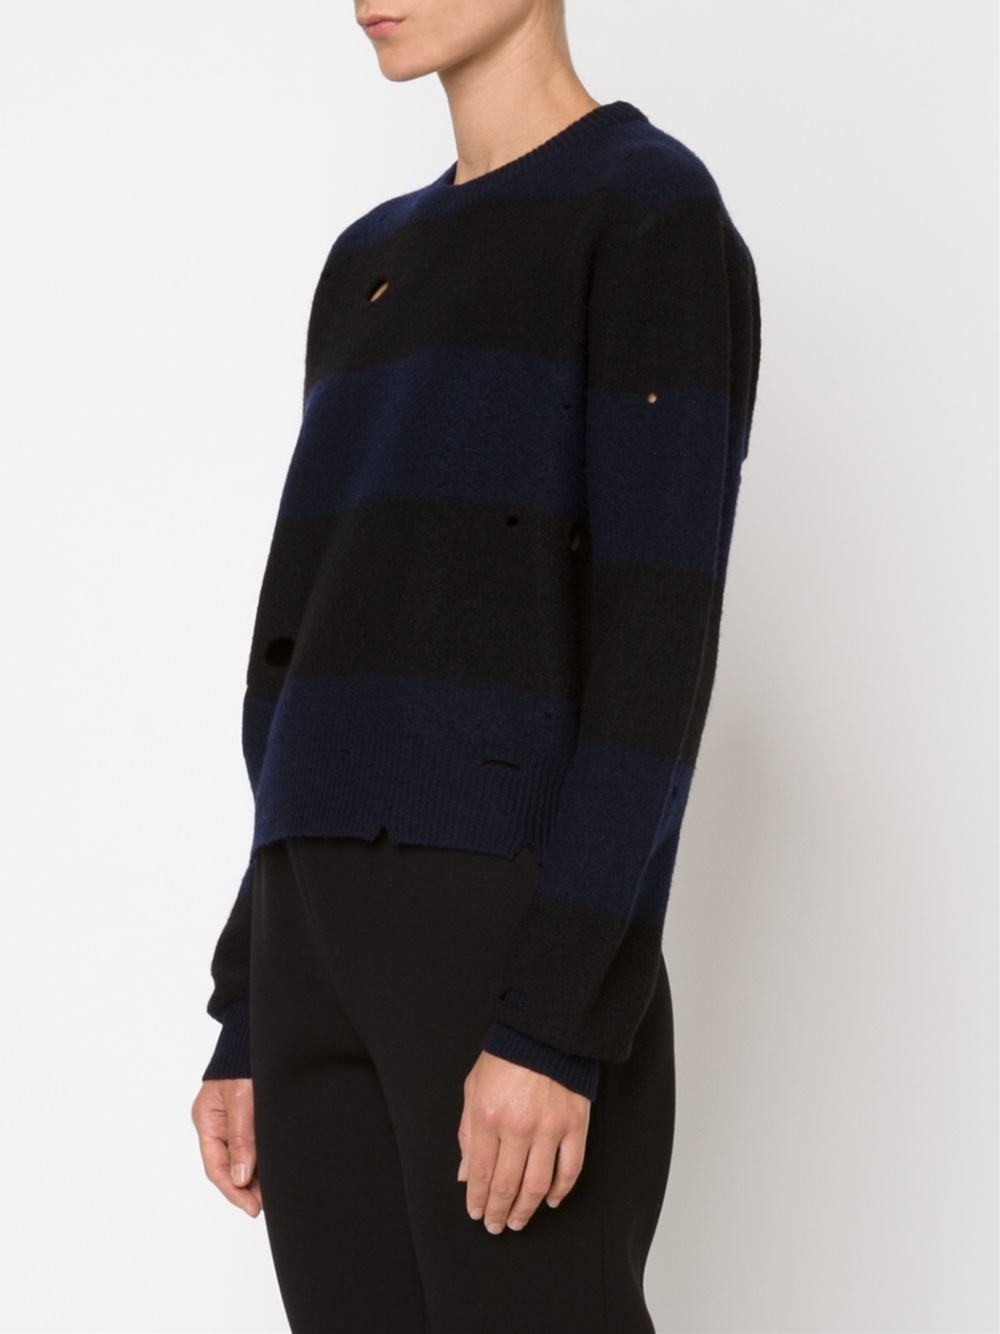 Alexander Wang Striped Sweater In Boiled Wool With Holes Allround in Blue -  Lyst